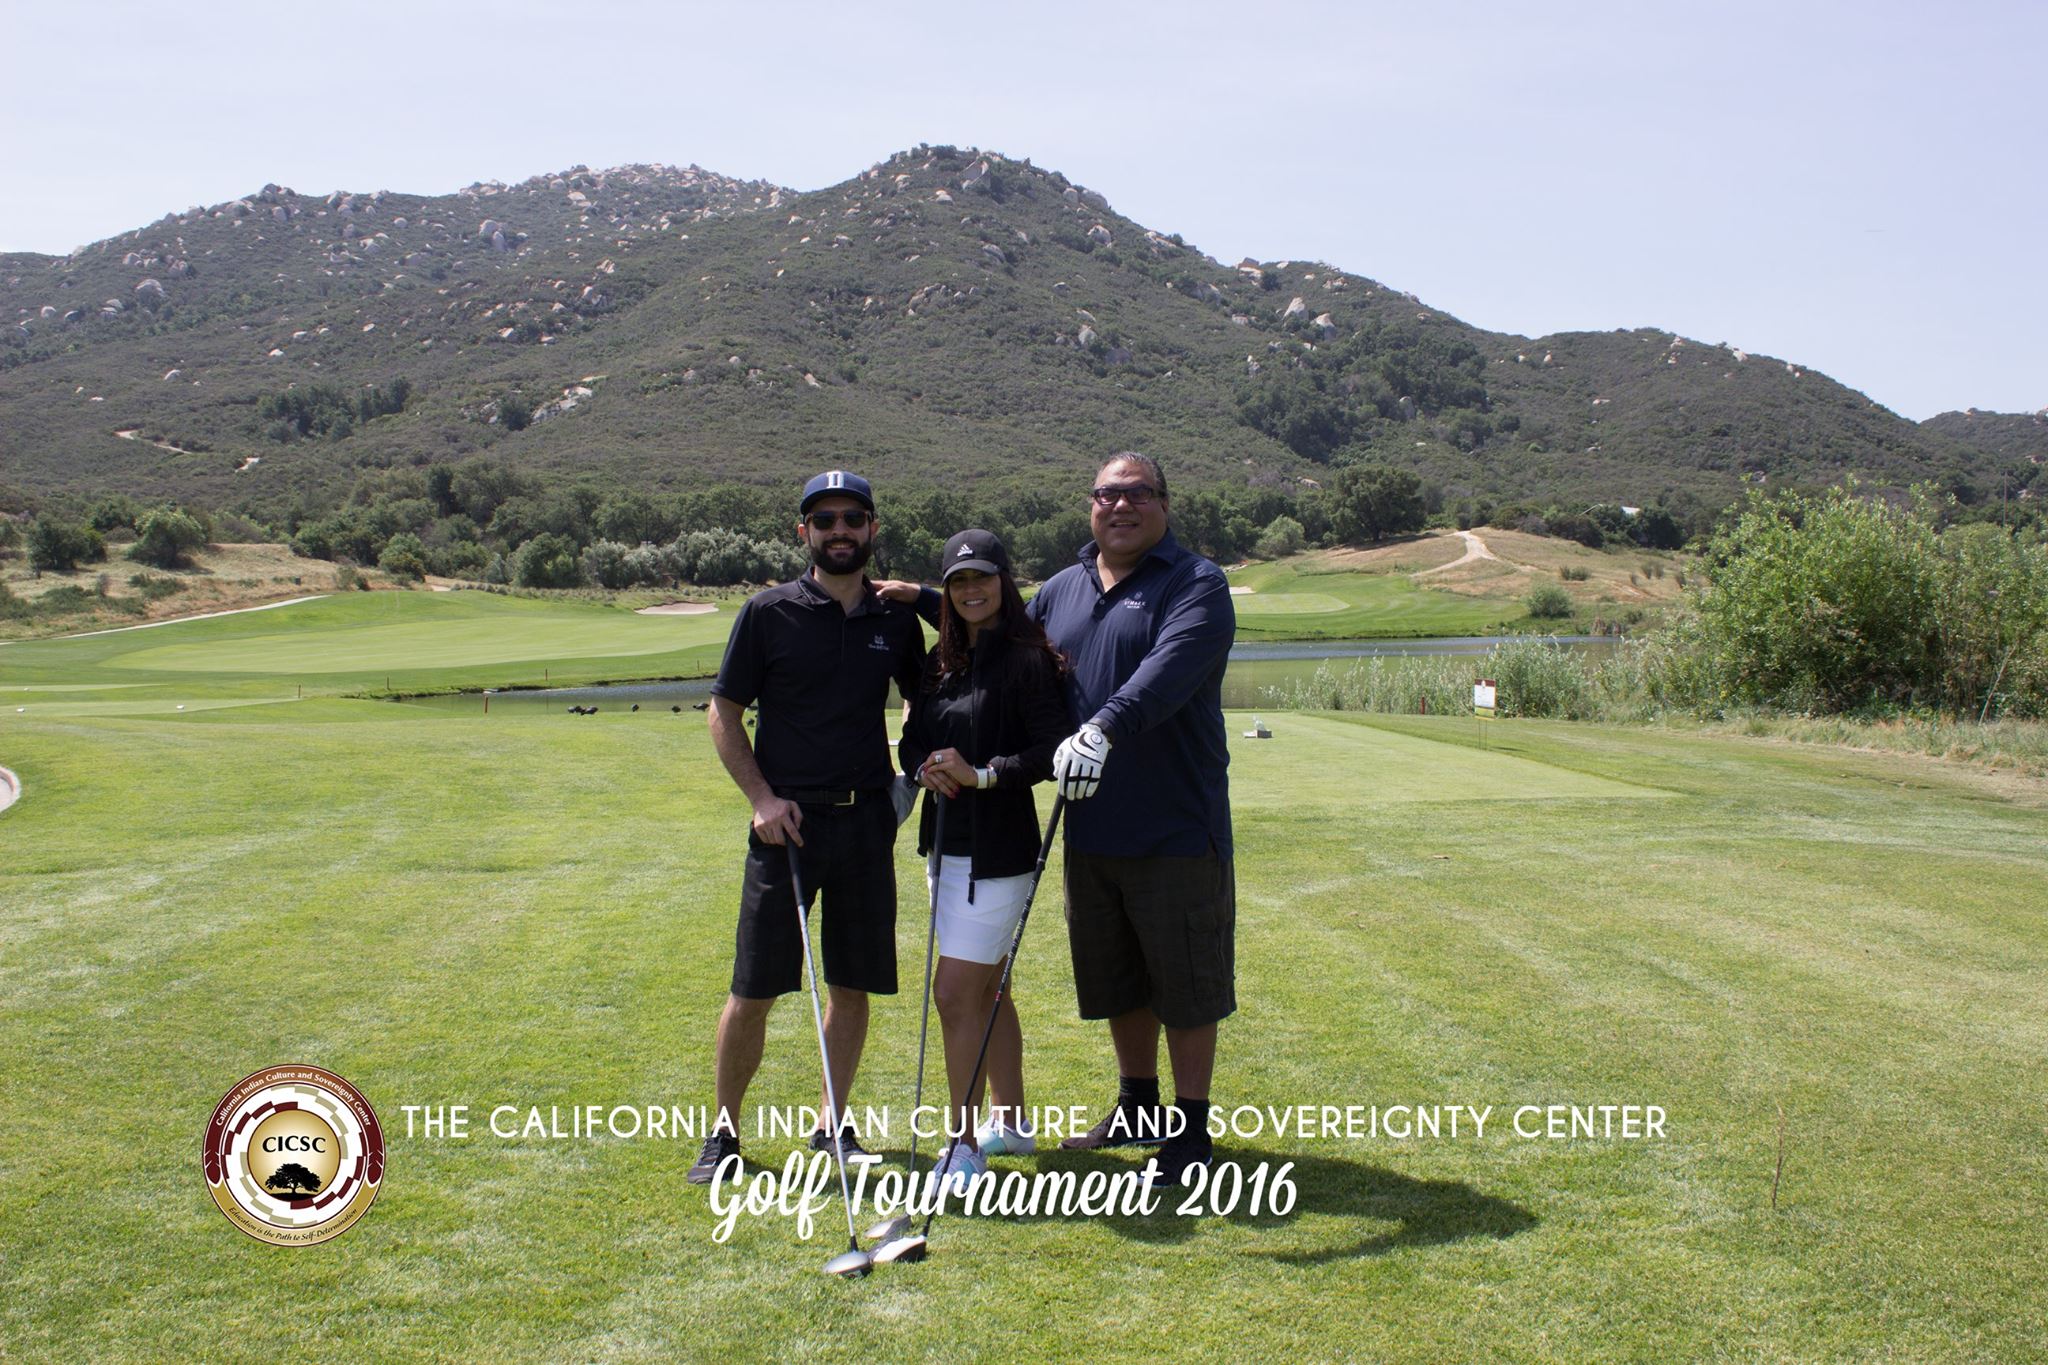 Alex Bailey, Joely Proudfit, Chris Eyre posing together on a green golf course with mountains behind in the distance and the words "The California Indian Culture Sovereignty & Center Golf Tournament 2016" at the bottom of the image with the CICSC logo